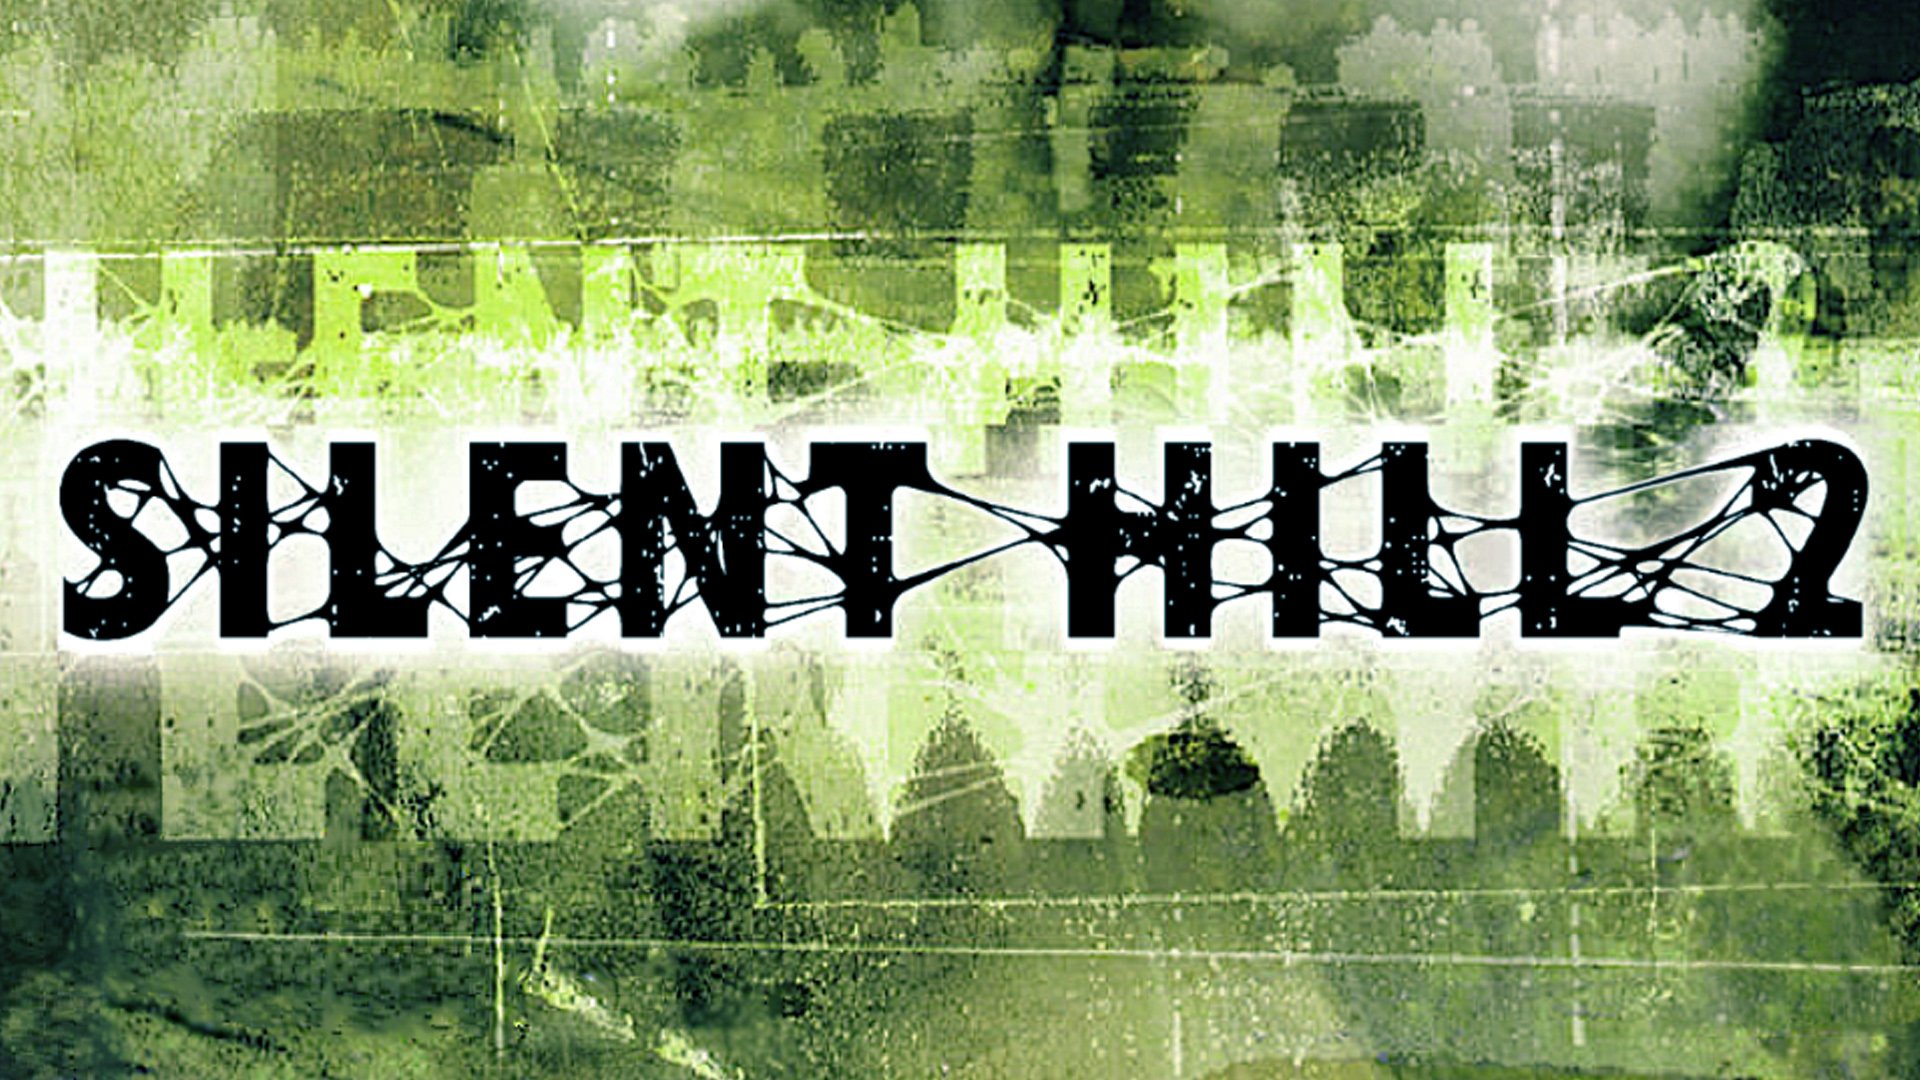 The Silent Hill 2 remake will be a PS5 exclusive — sort of